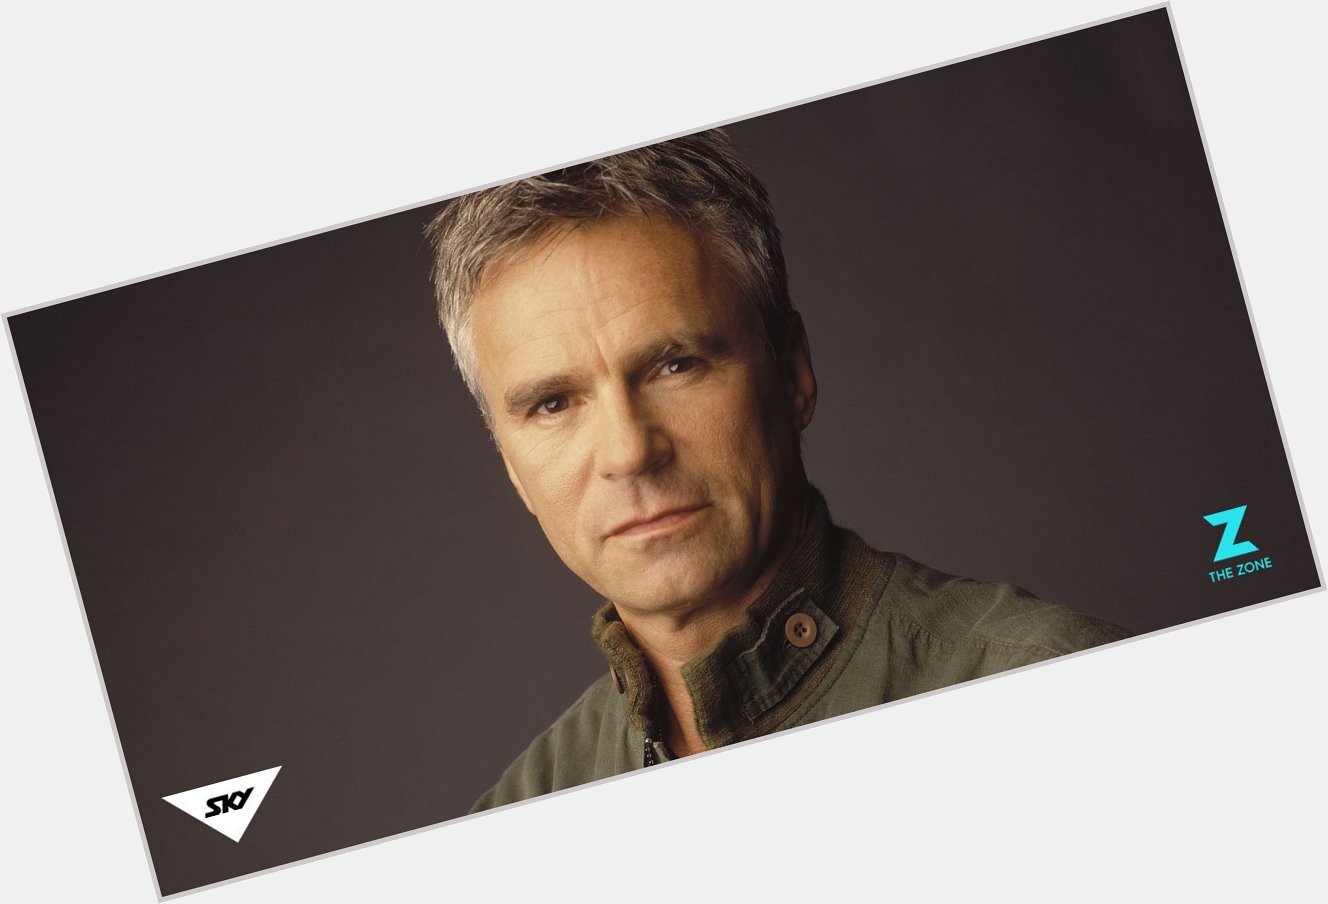 A very Happy Birthday to Stargate SG-1 and MacGyver star RICHARD DEAN ANDERSON! 